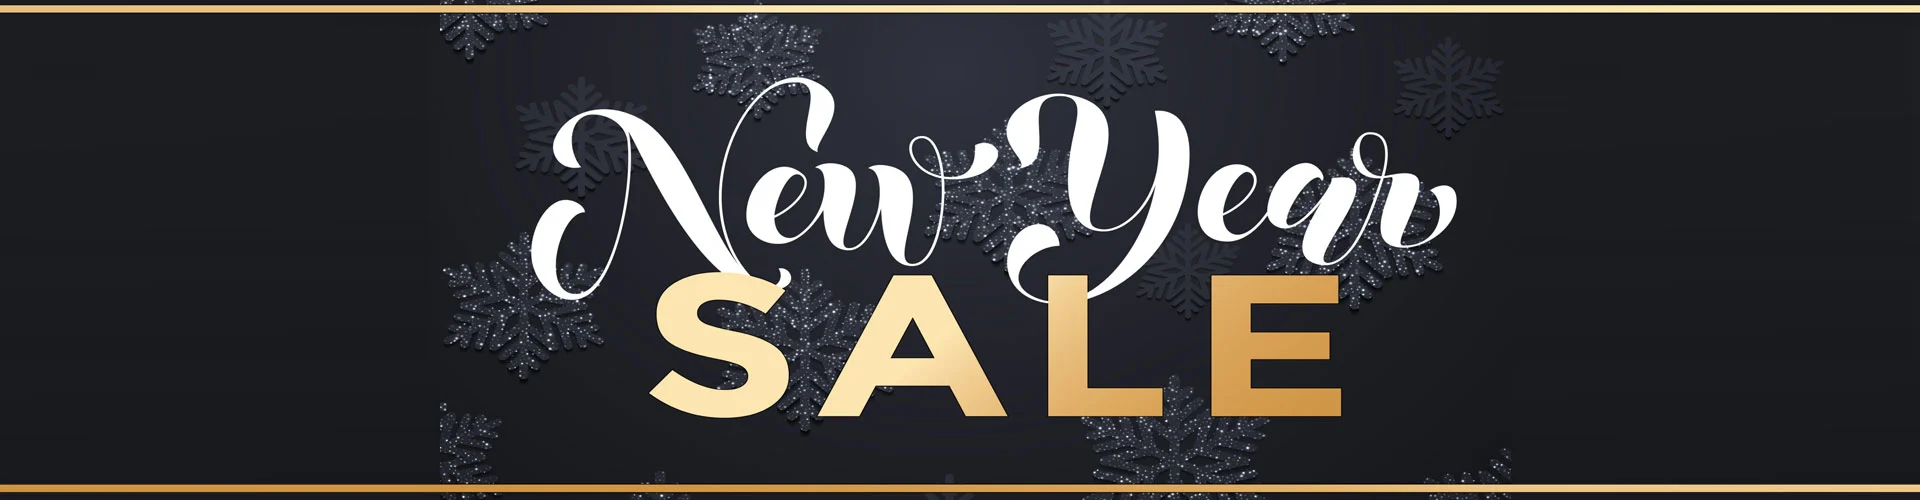 New Year SALE -50%